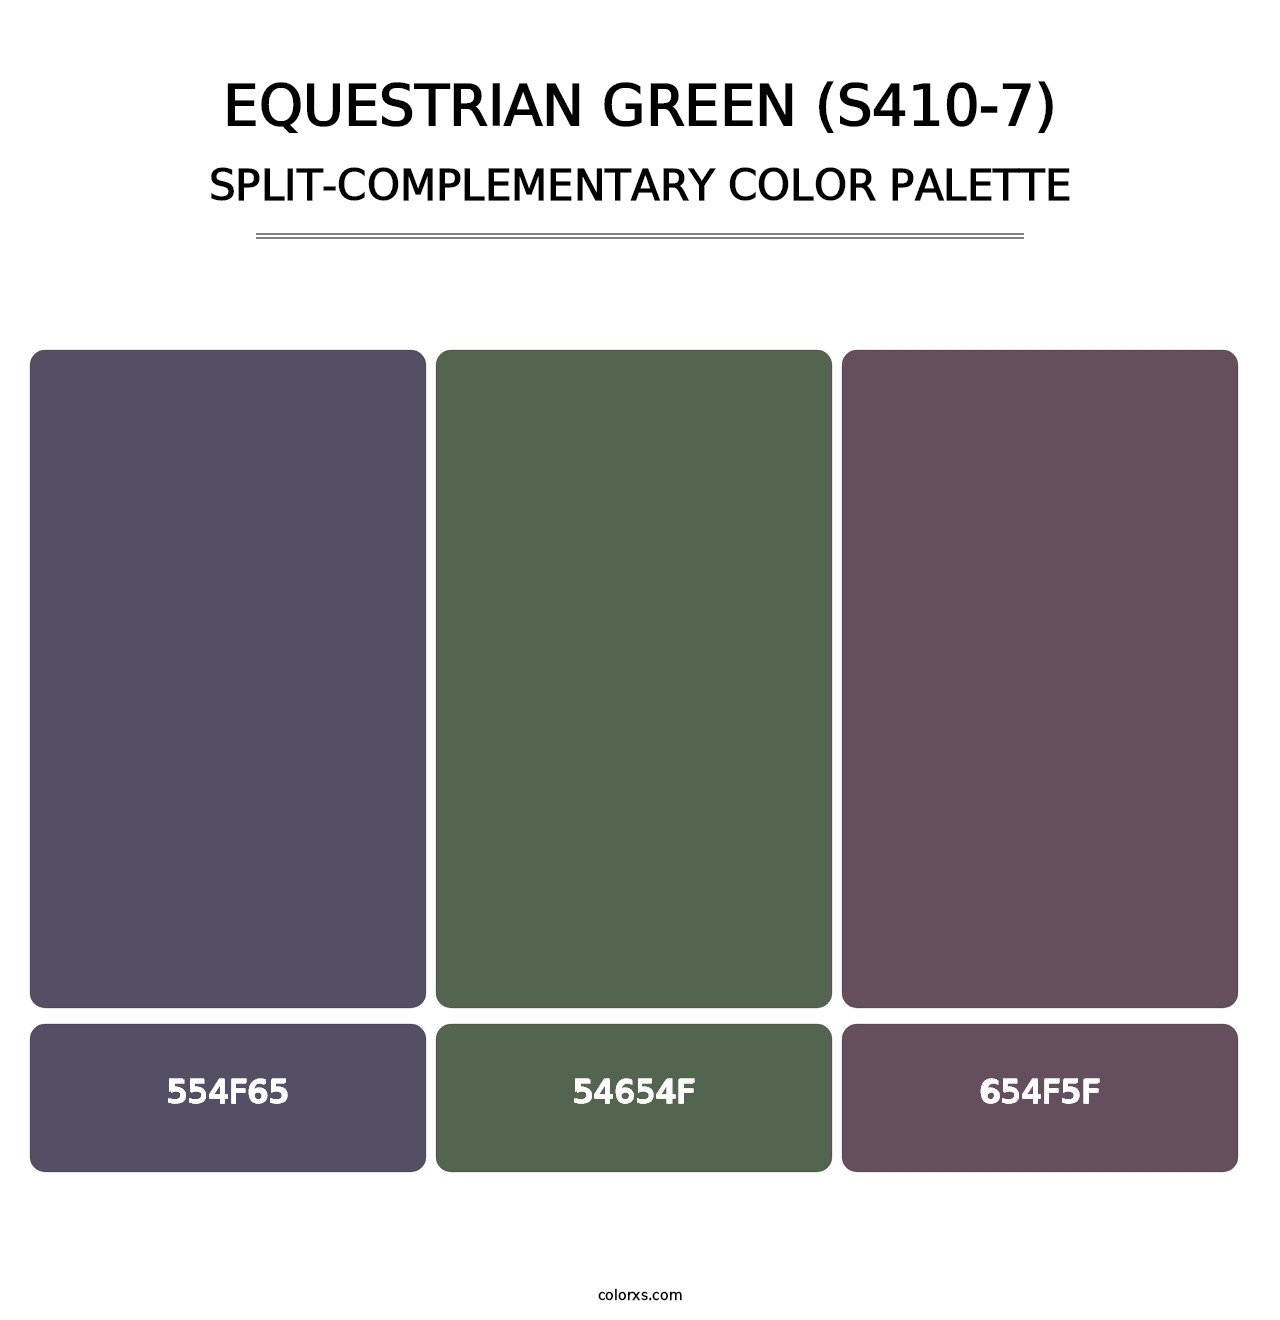 Equestrian Green (S410-7) - Split-Complementary Color Palette